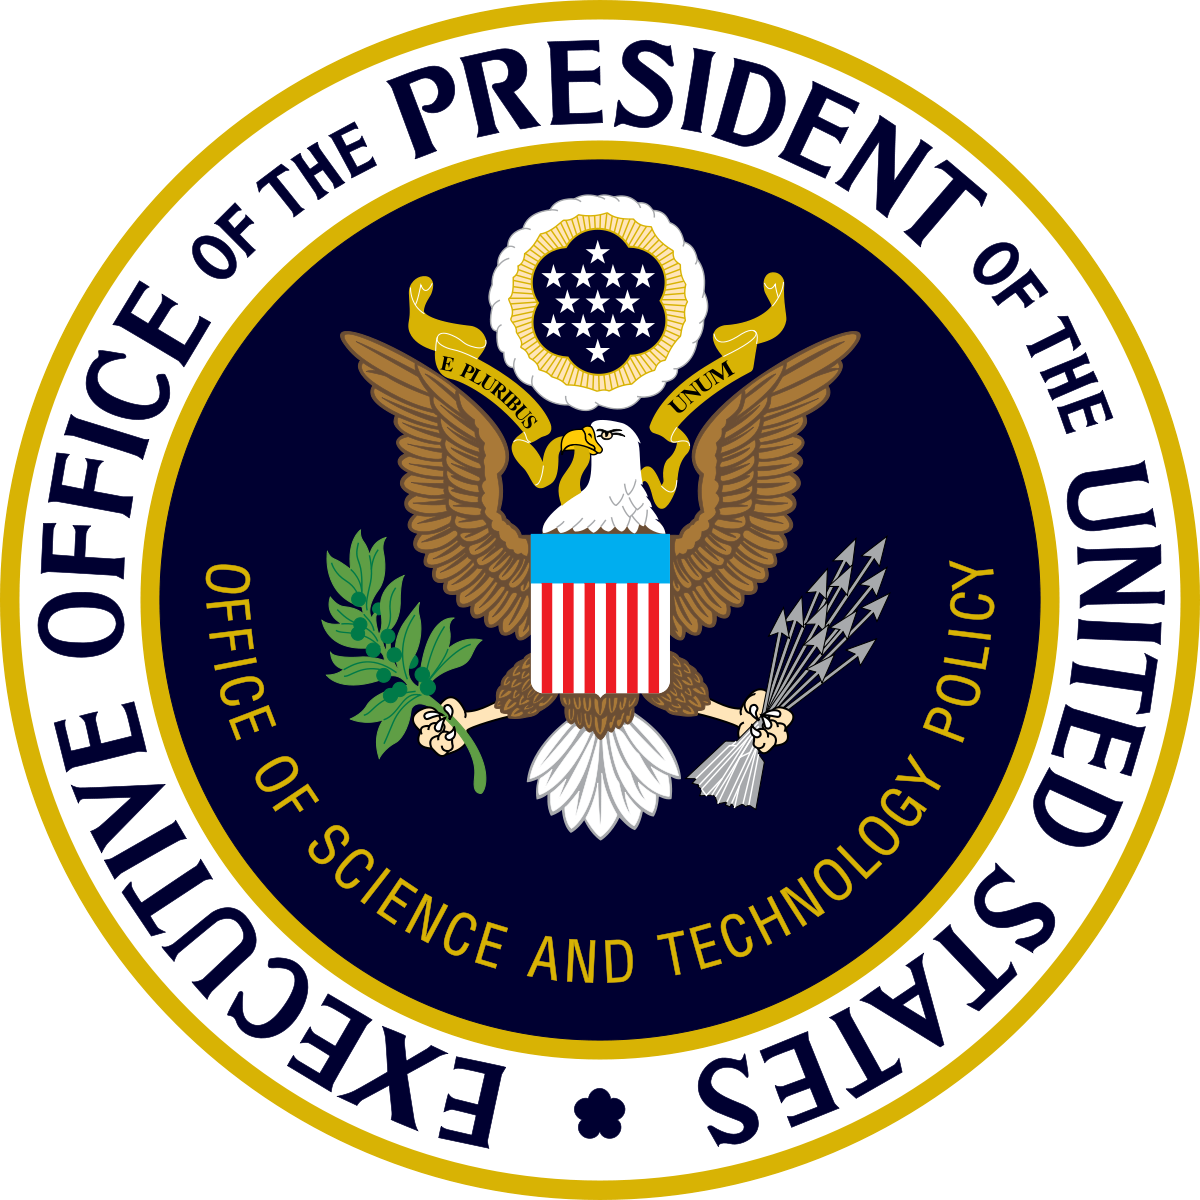 Office of Science and Technology Policy